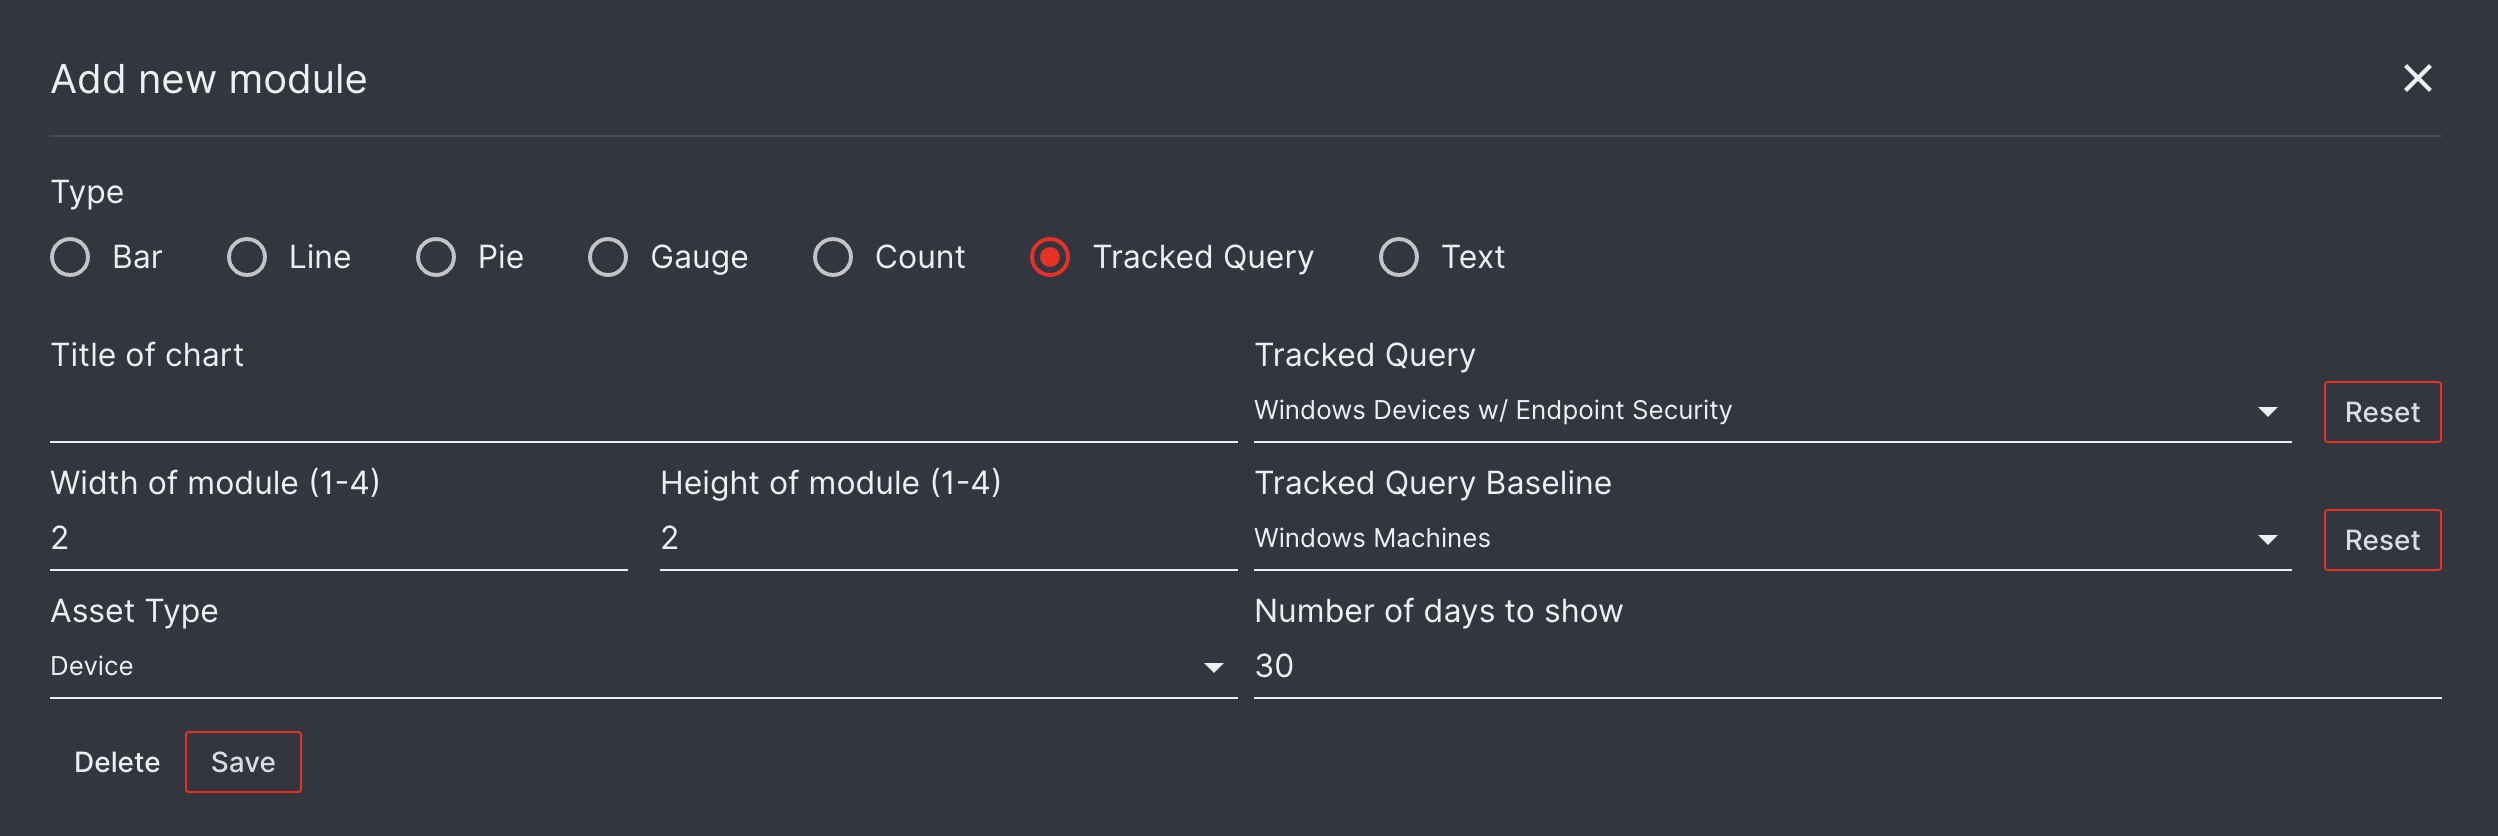 Tracked Query module configuration